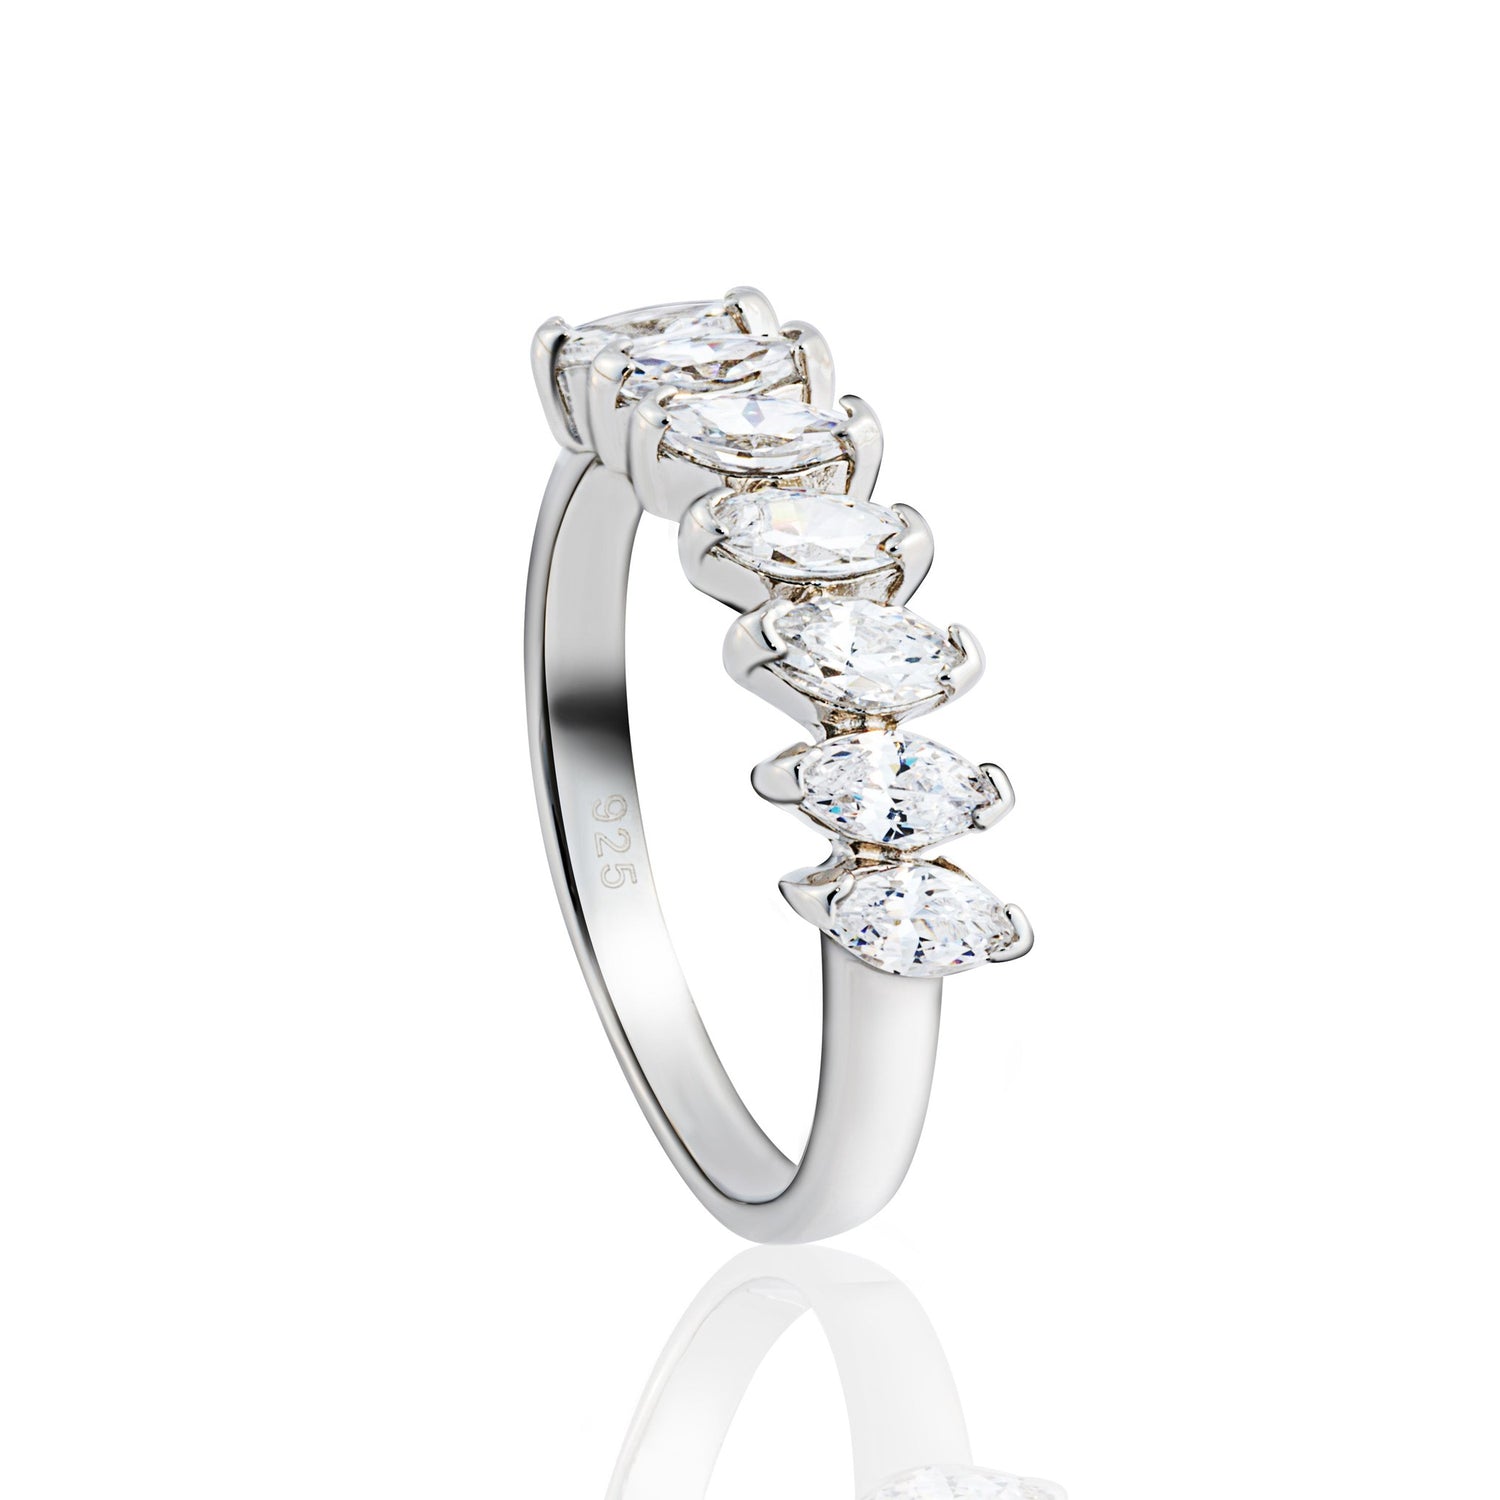 The Dew Drops Ring